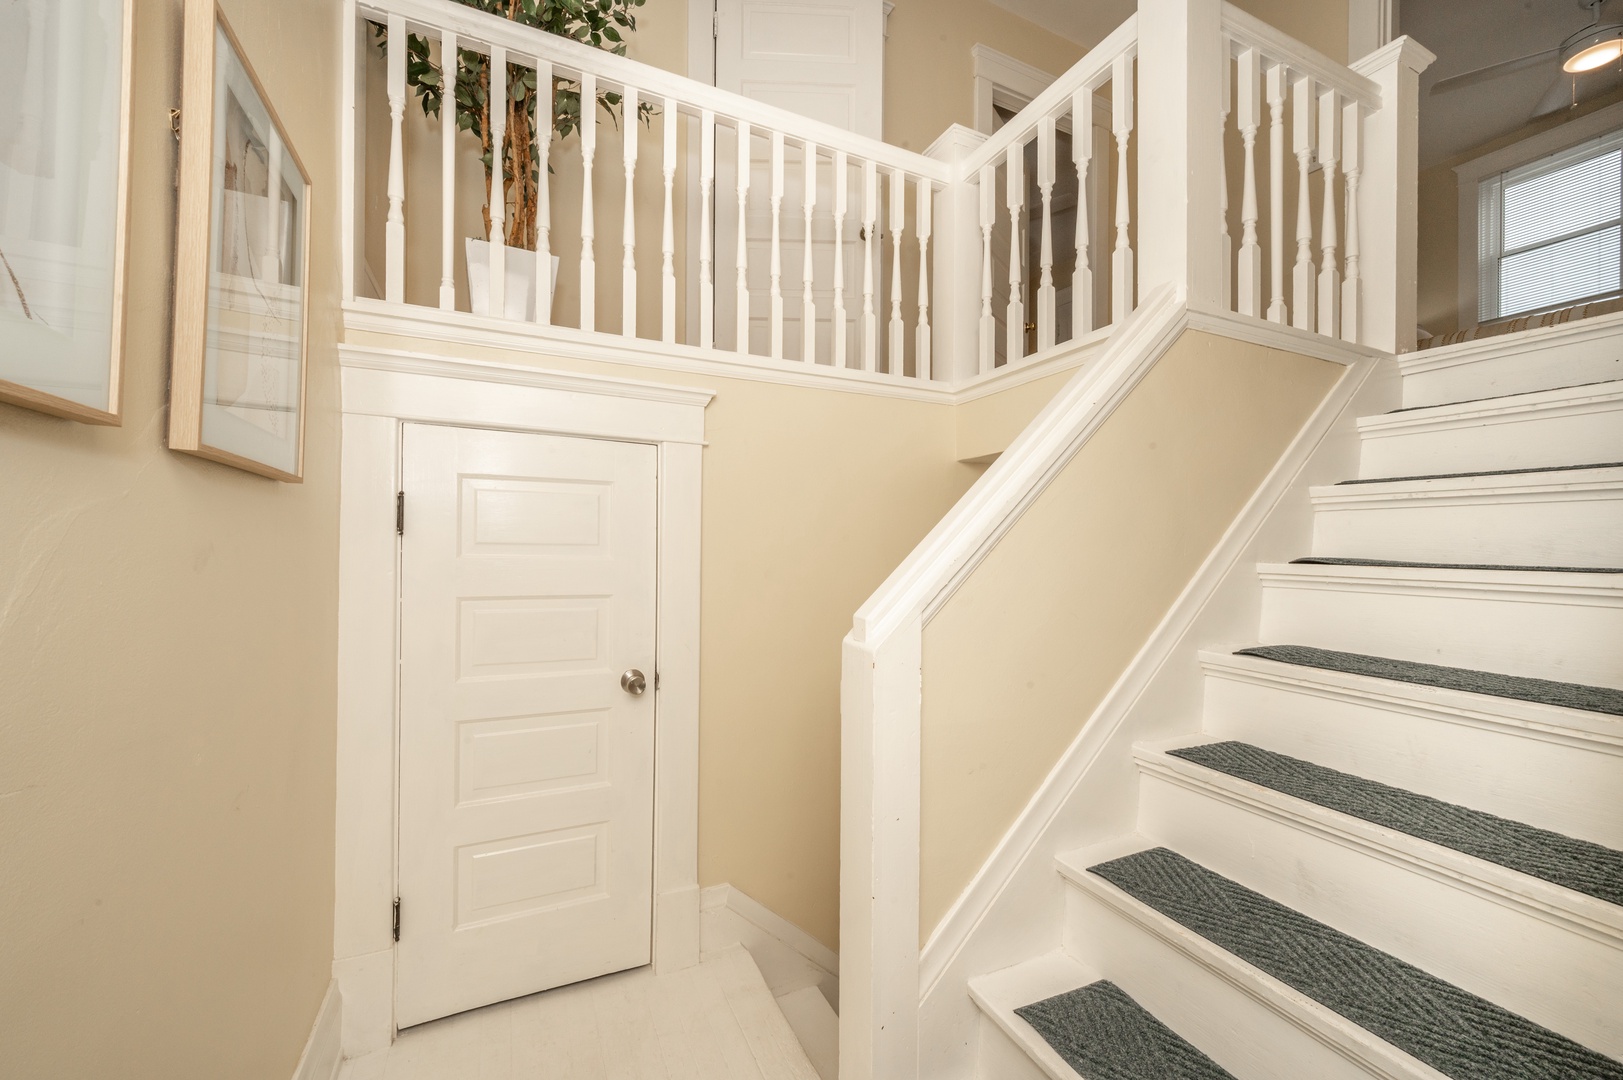 This home’s historic charm continues even throughout the staircase